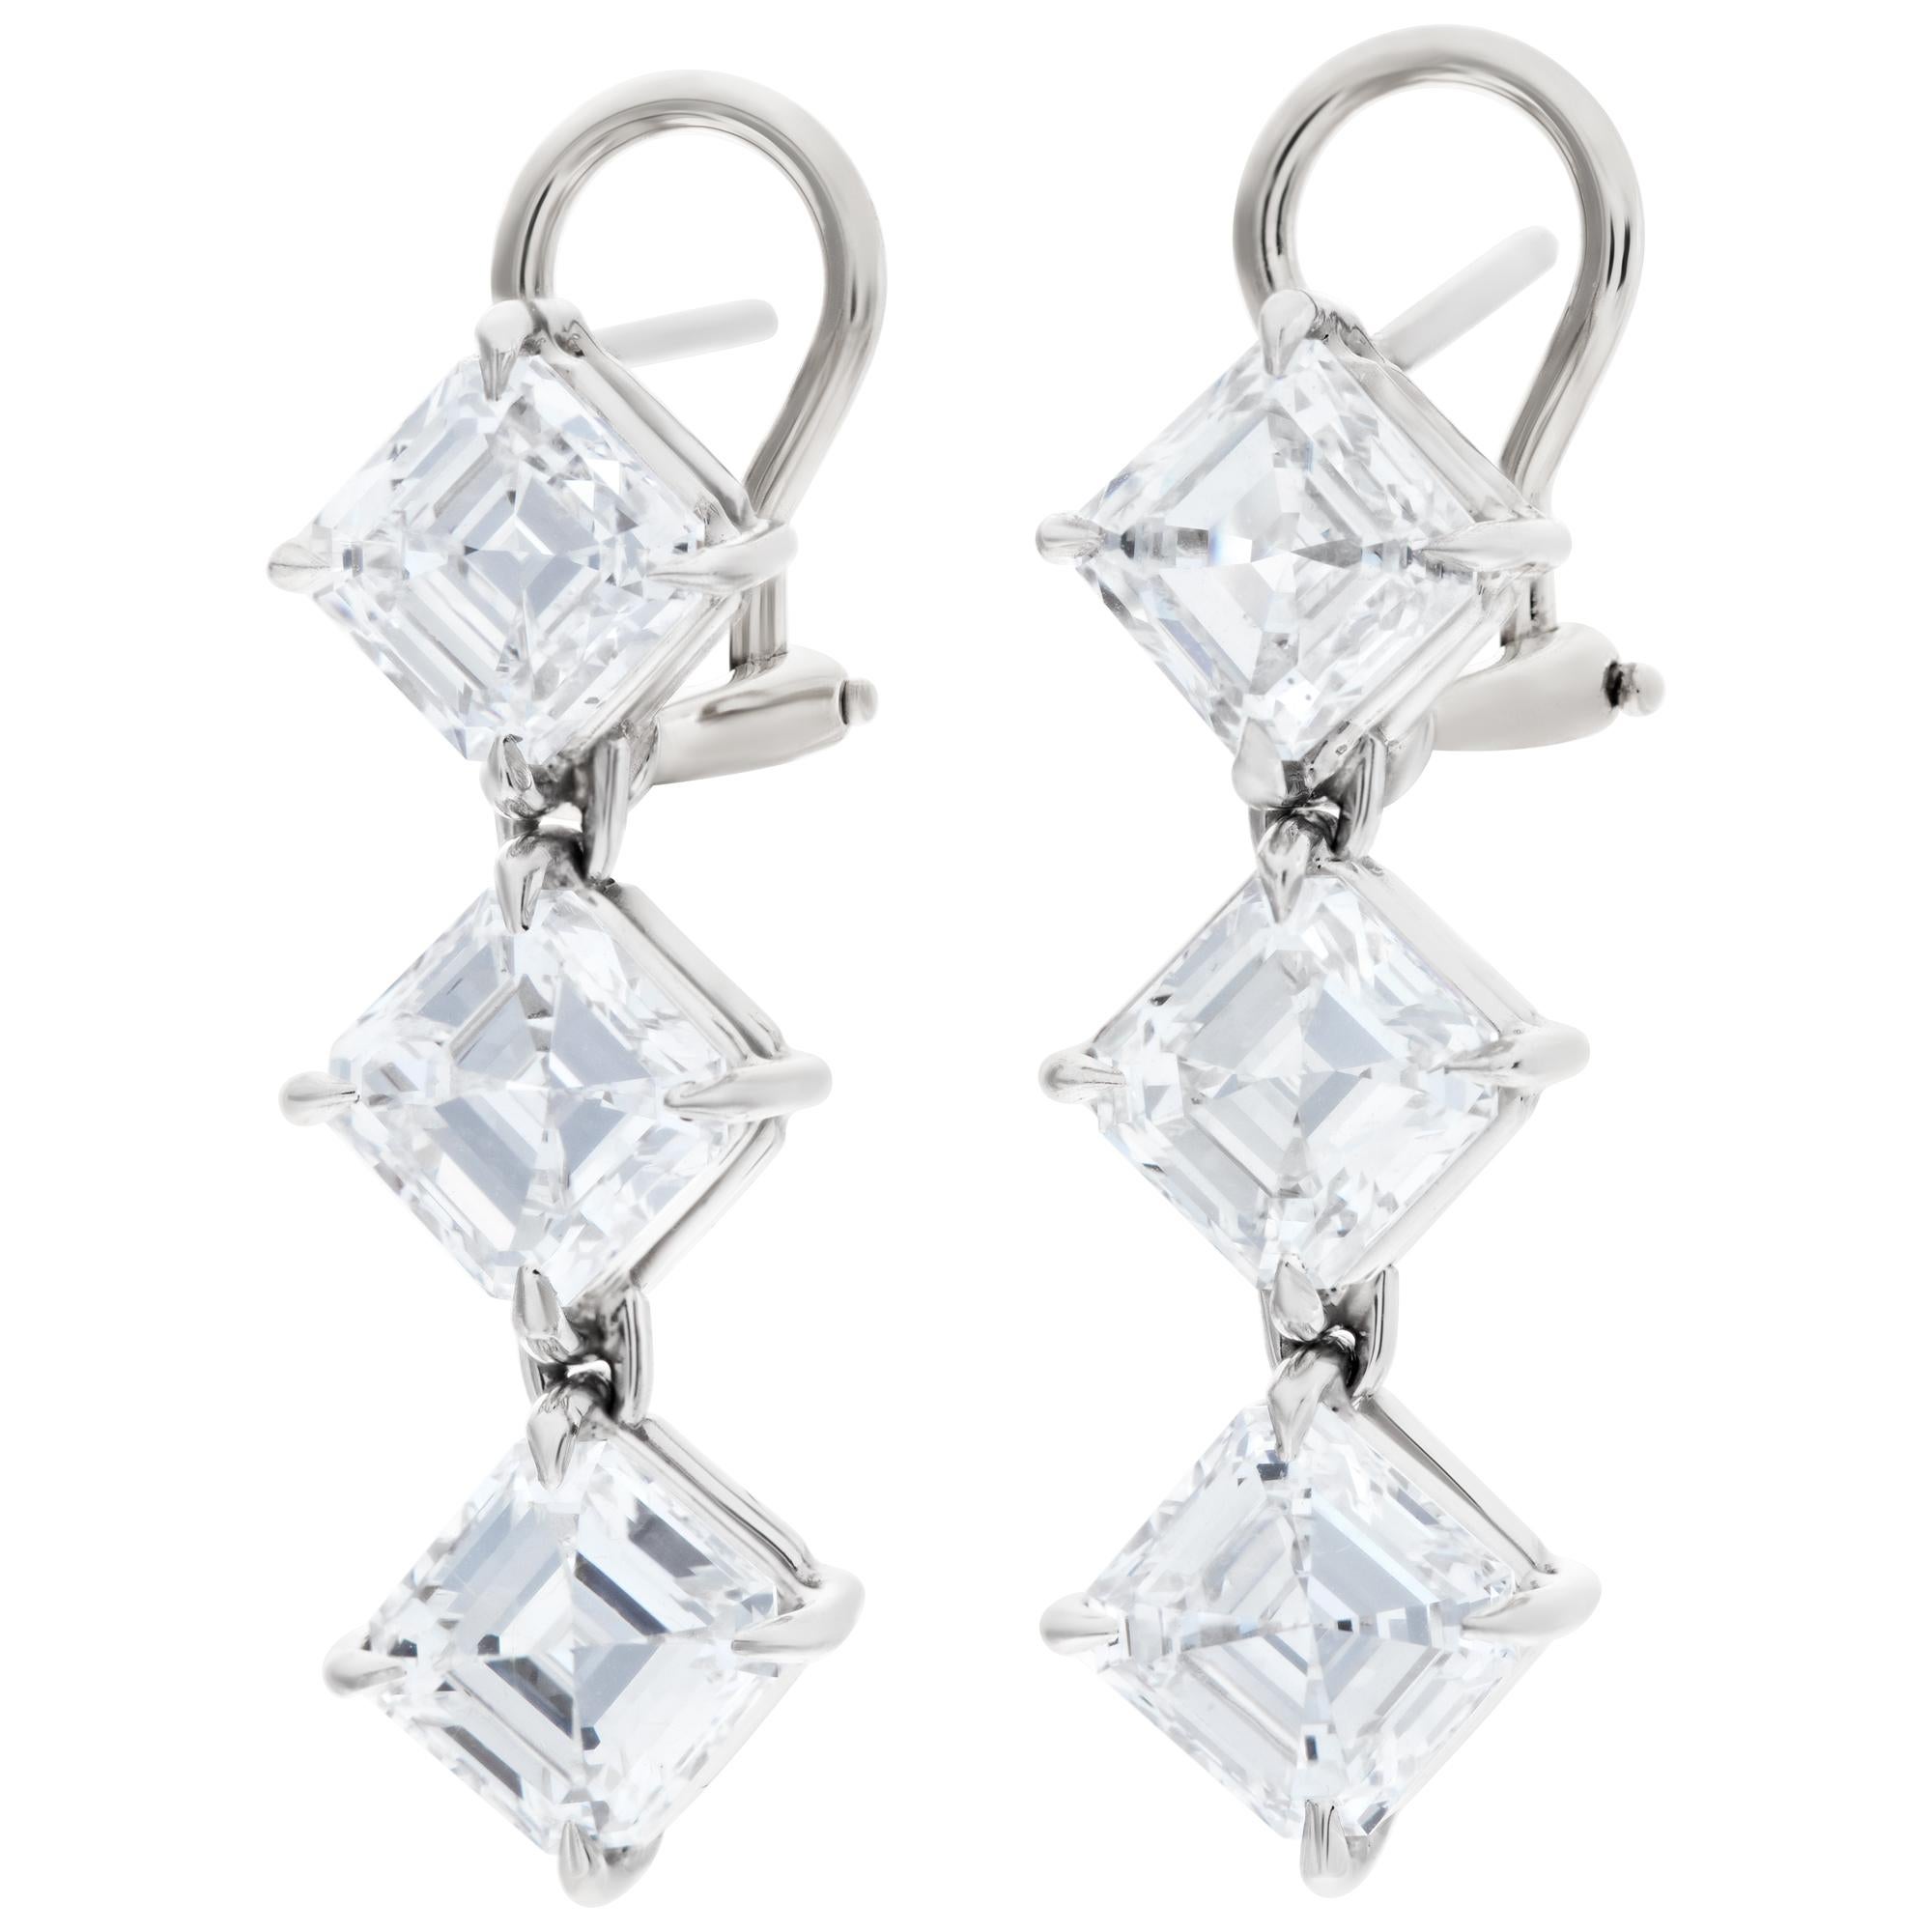 All GIA Certified, 6 asscher cut diamonds totaling 6.02 carats, set as dangling stud earrings, 14K white gold, with secure omega/clip post- Each earrings: Asscher top: 0.99 carat E/SI1 &  1.00 G/SI1-  Middle: Asscher cut: 1.00 carat D/SI1 & 1.01